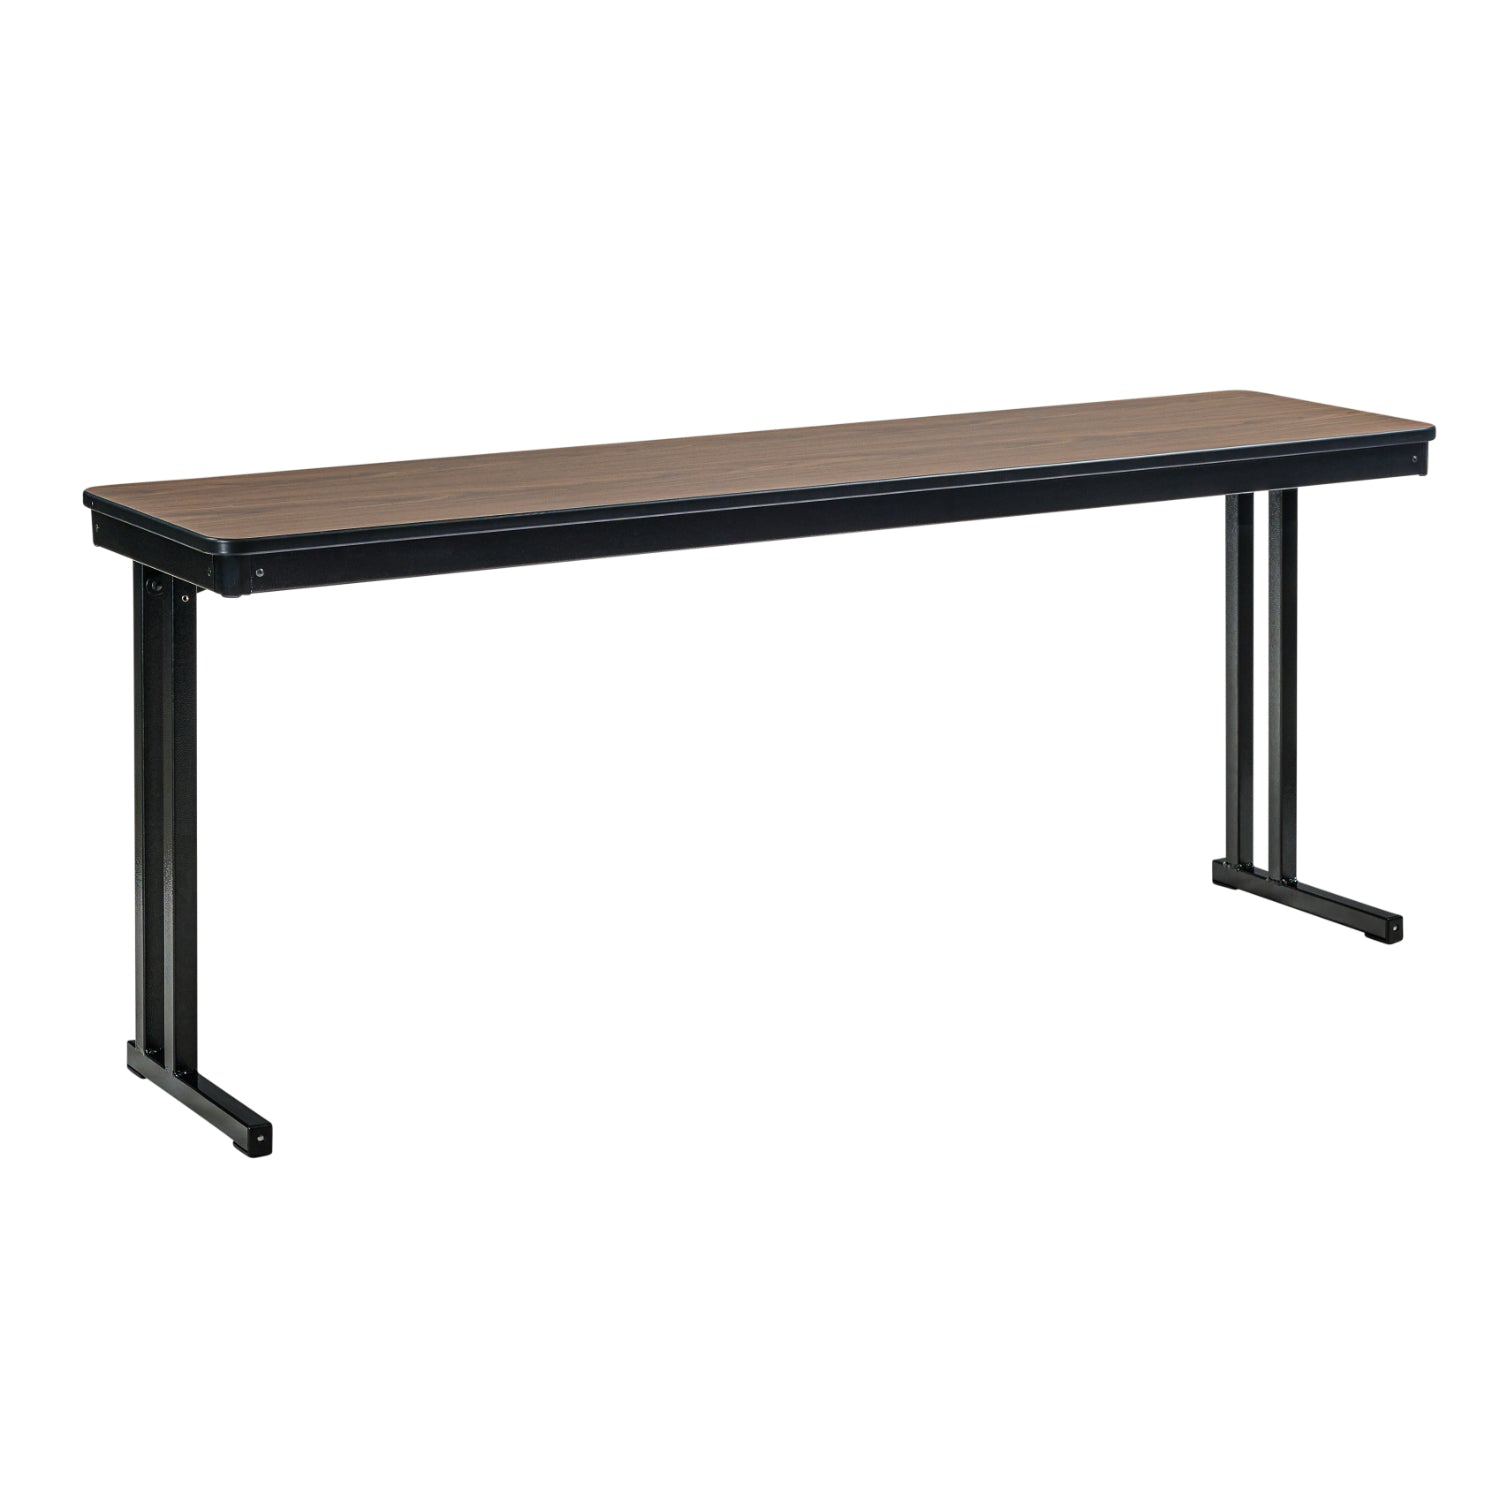 Max Seating Folding Training and Seminar Table with Cantilever Legs, 18" x 72", High Pressure Laminate Top with MDF Core/ProtectEdge